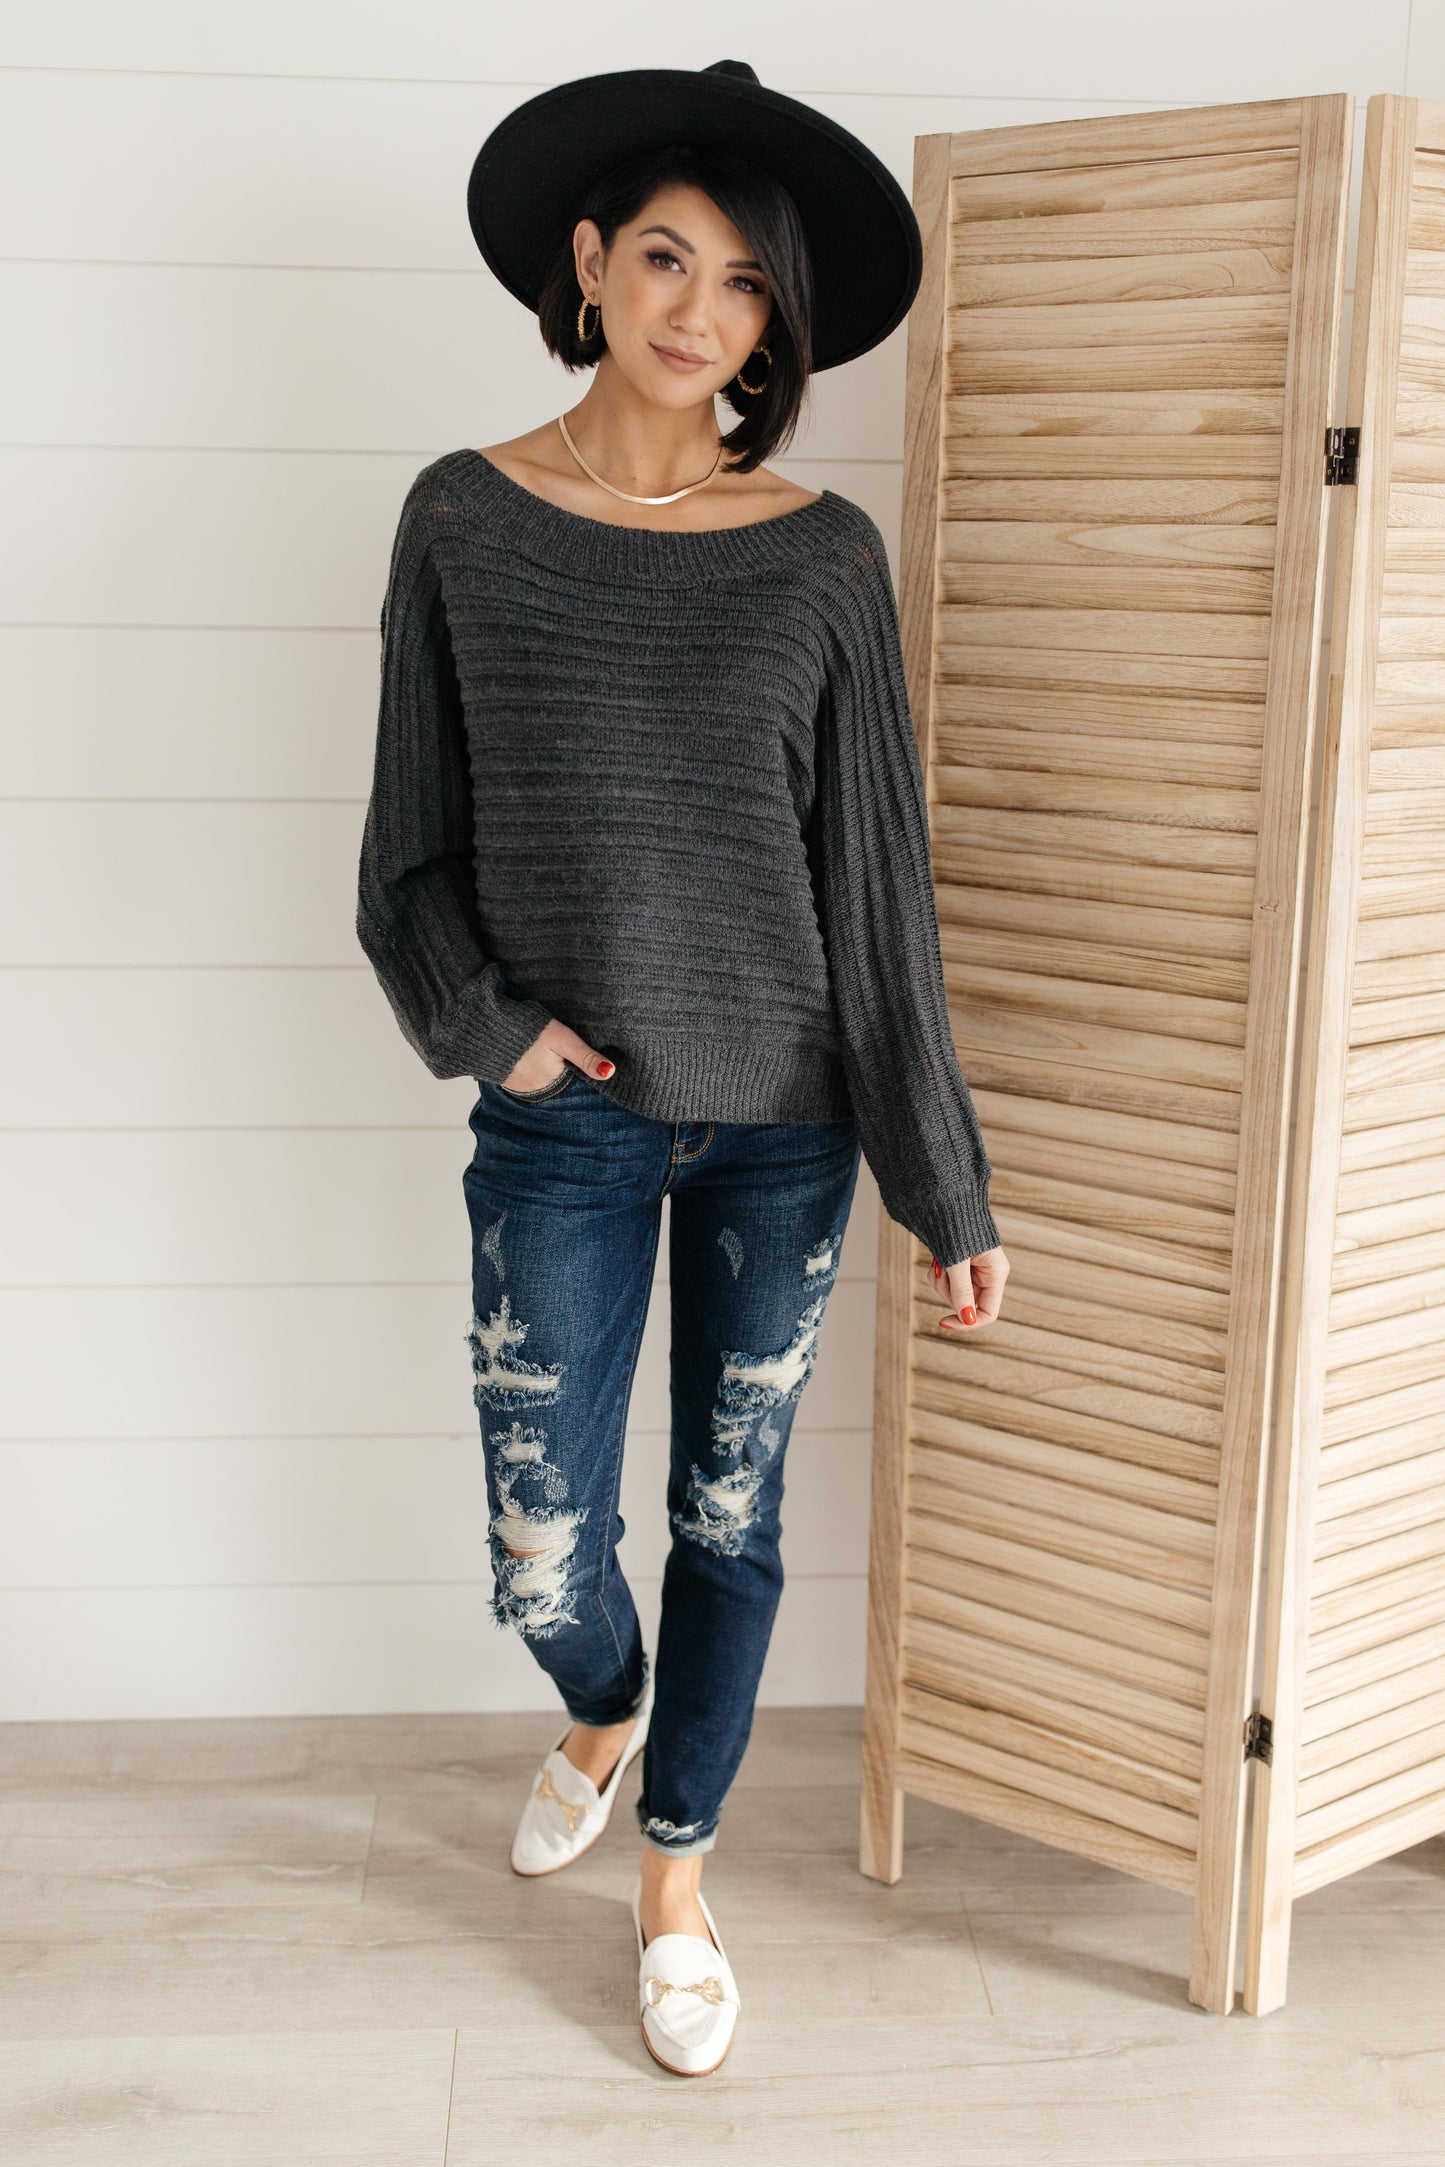 Cozy and Chic Dressed in Charcoal